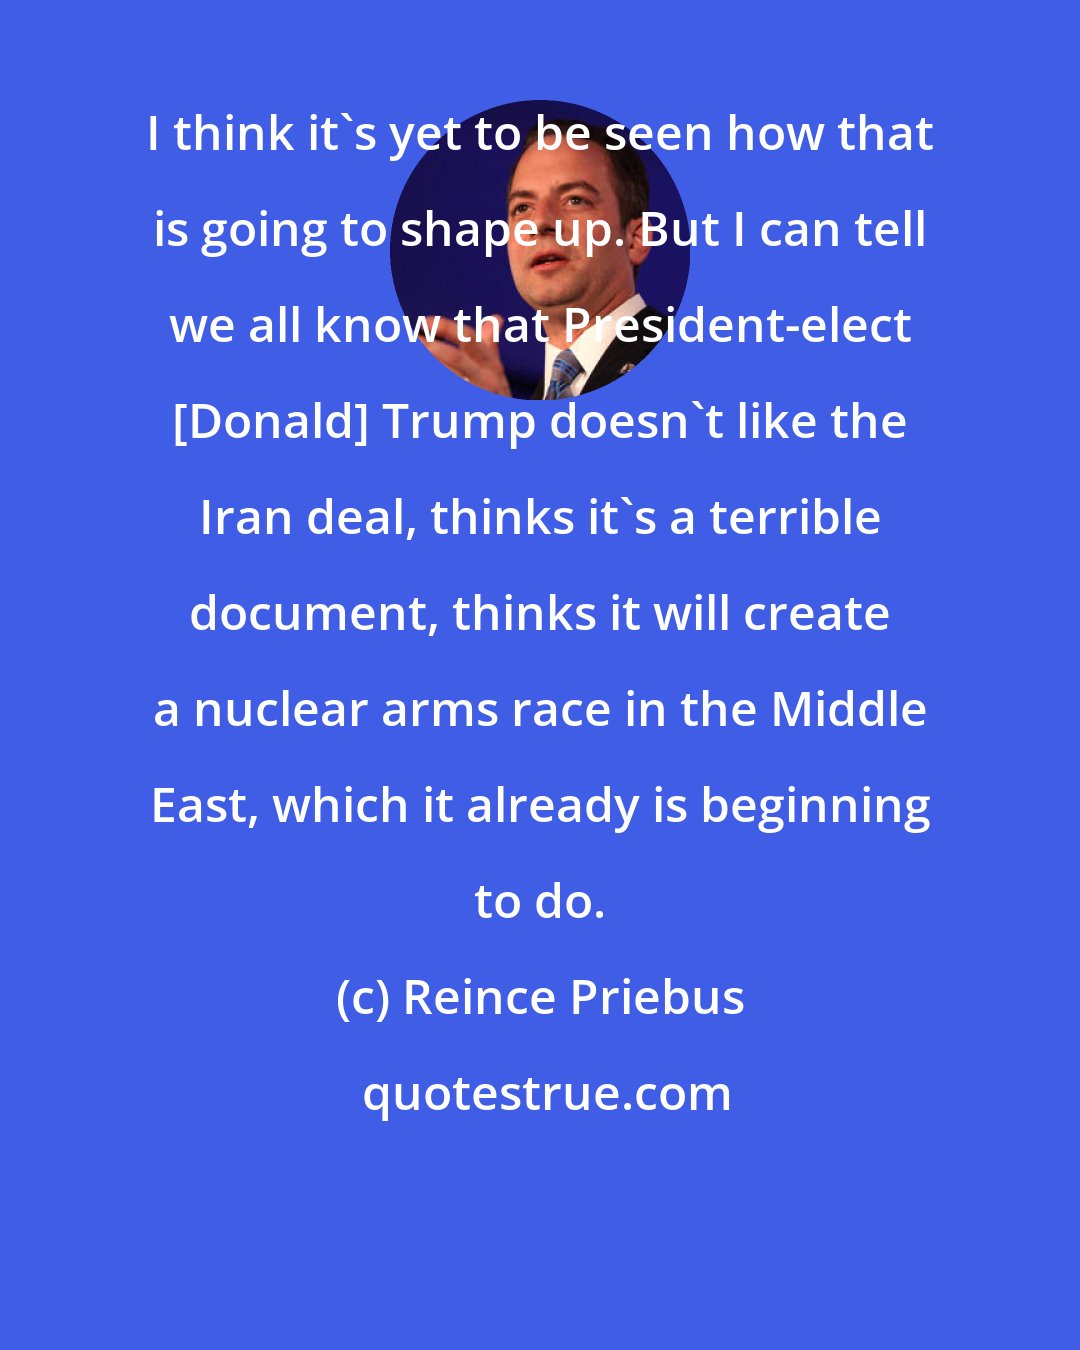 Reince Priebus: I think it's yet to be seen how that is going to shape up. But I can tell we all know that President-elect [Donald] Trump doesn't like the Iran deal, thinks it's a terrible document, thinks it will create a nuclear arms race in the Middle East, which it already is beginning to do.